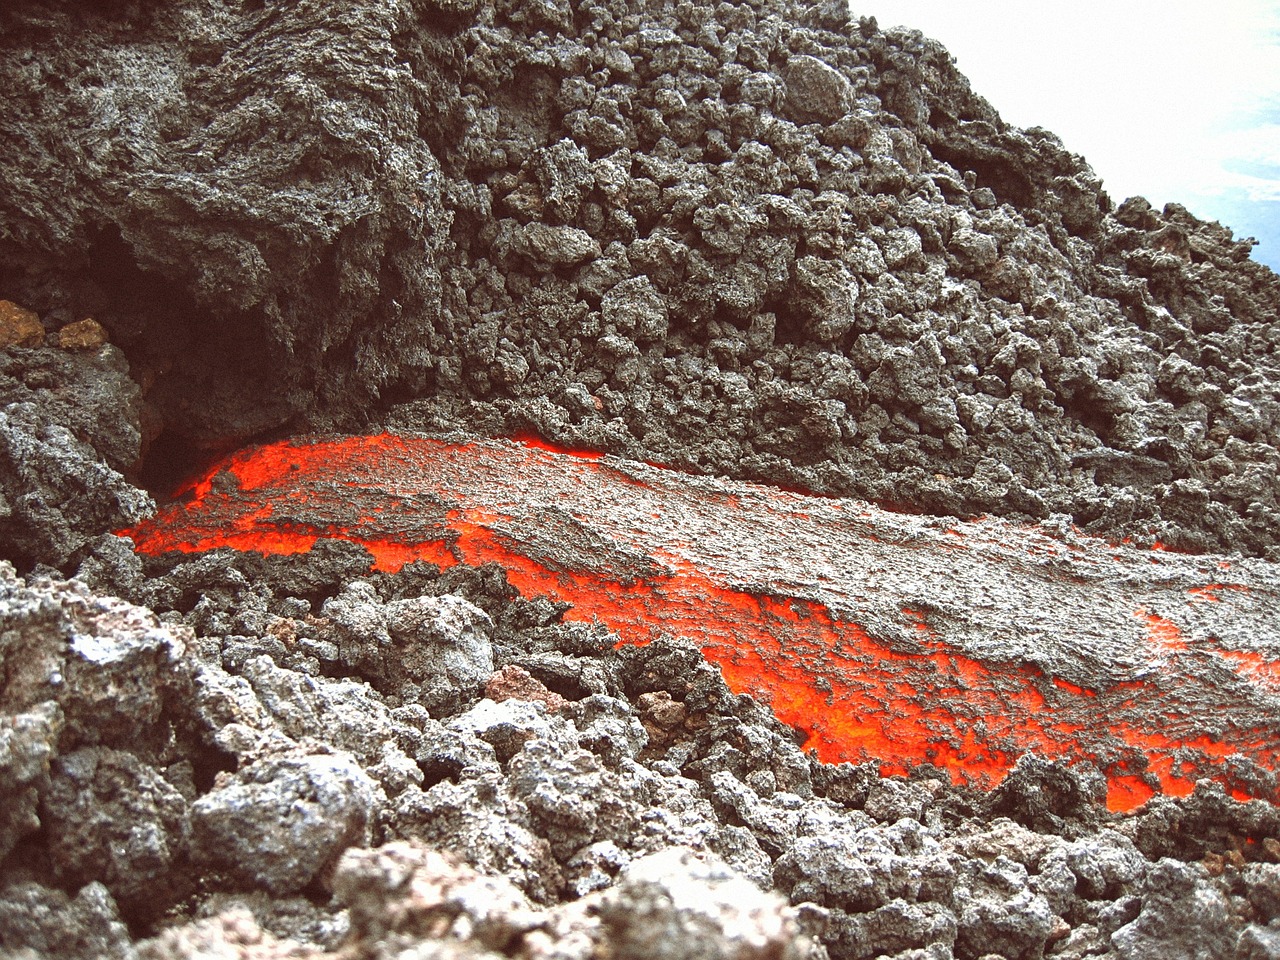 Dr Ubide and her team have analysed variations in the chemical composition of volcanic crystals